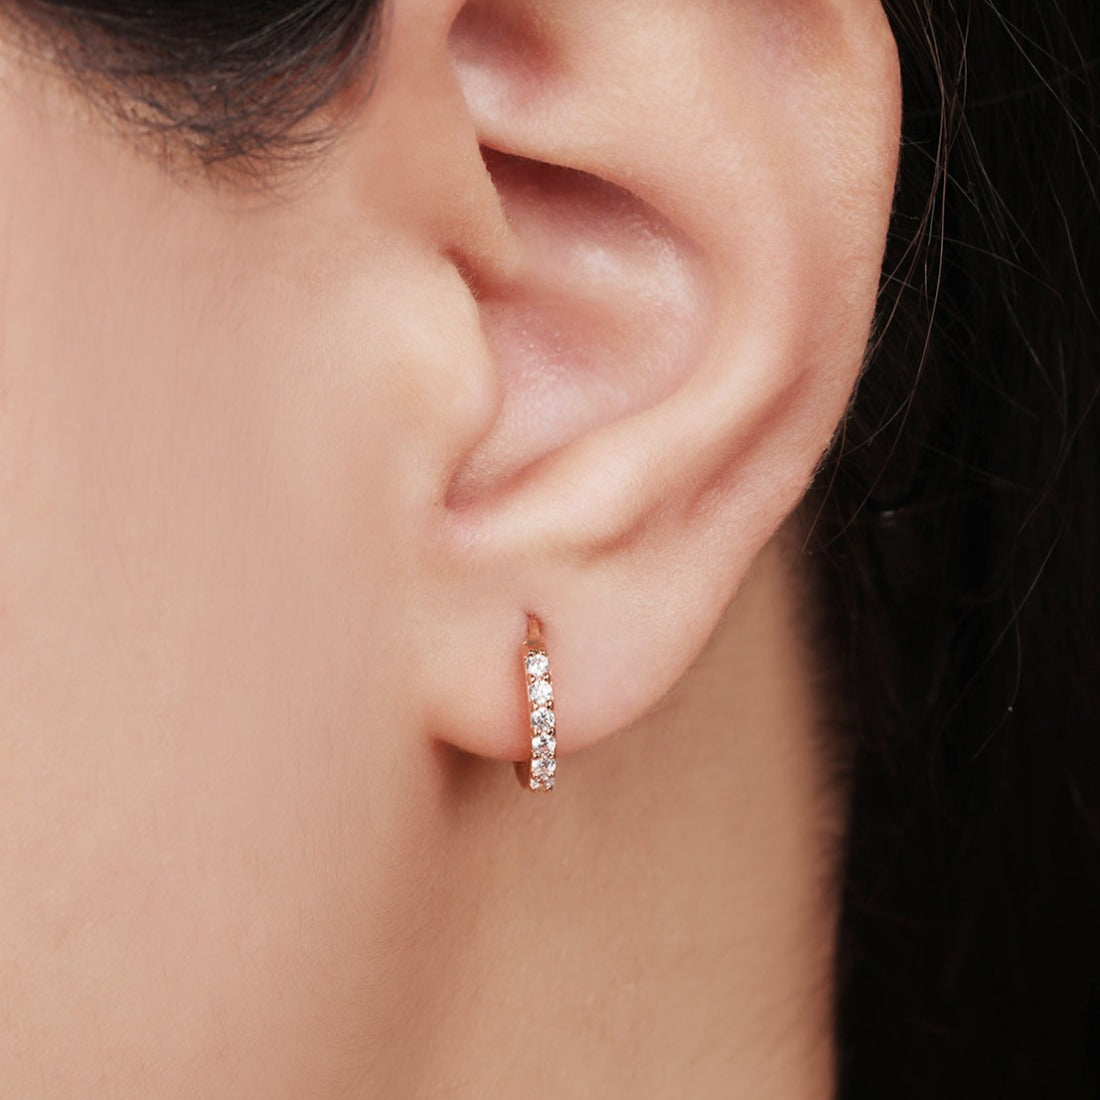 The Classic Rose Gold Moment Hoop 925 Silver Earrings